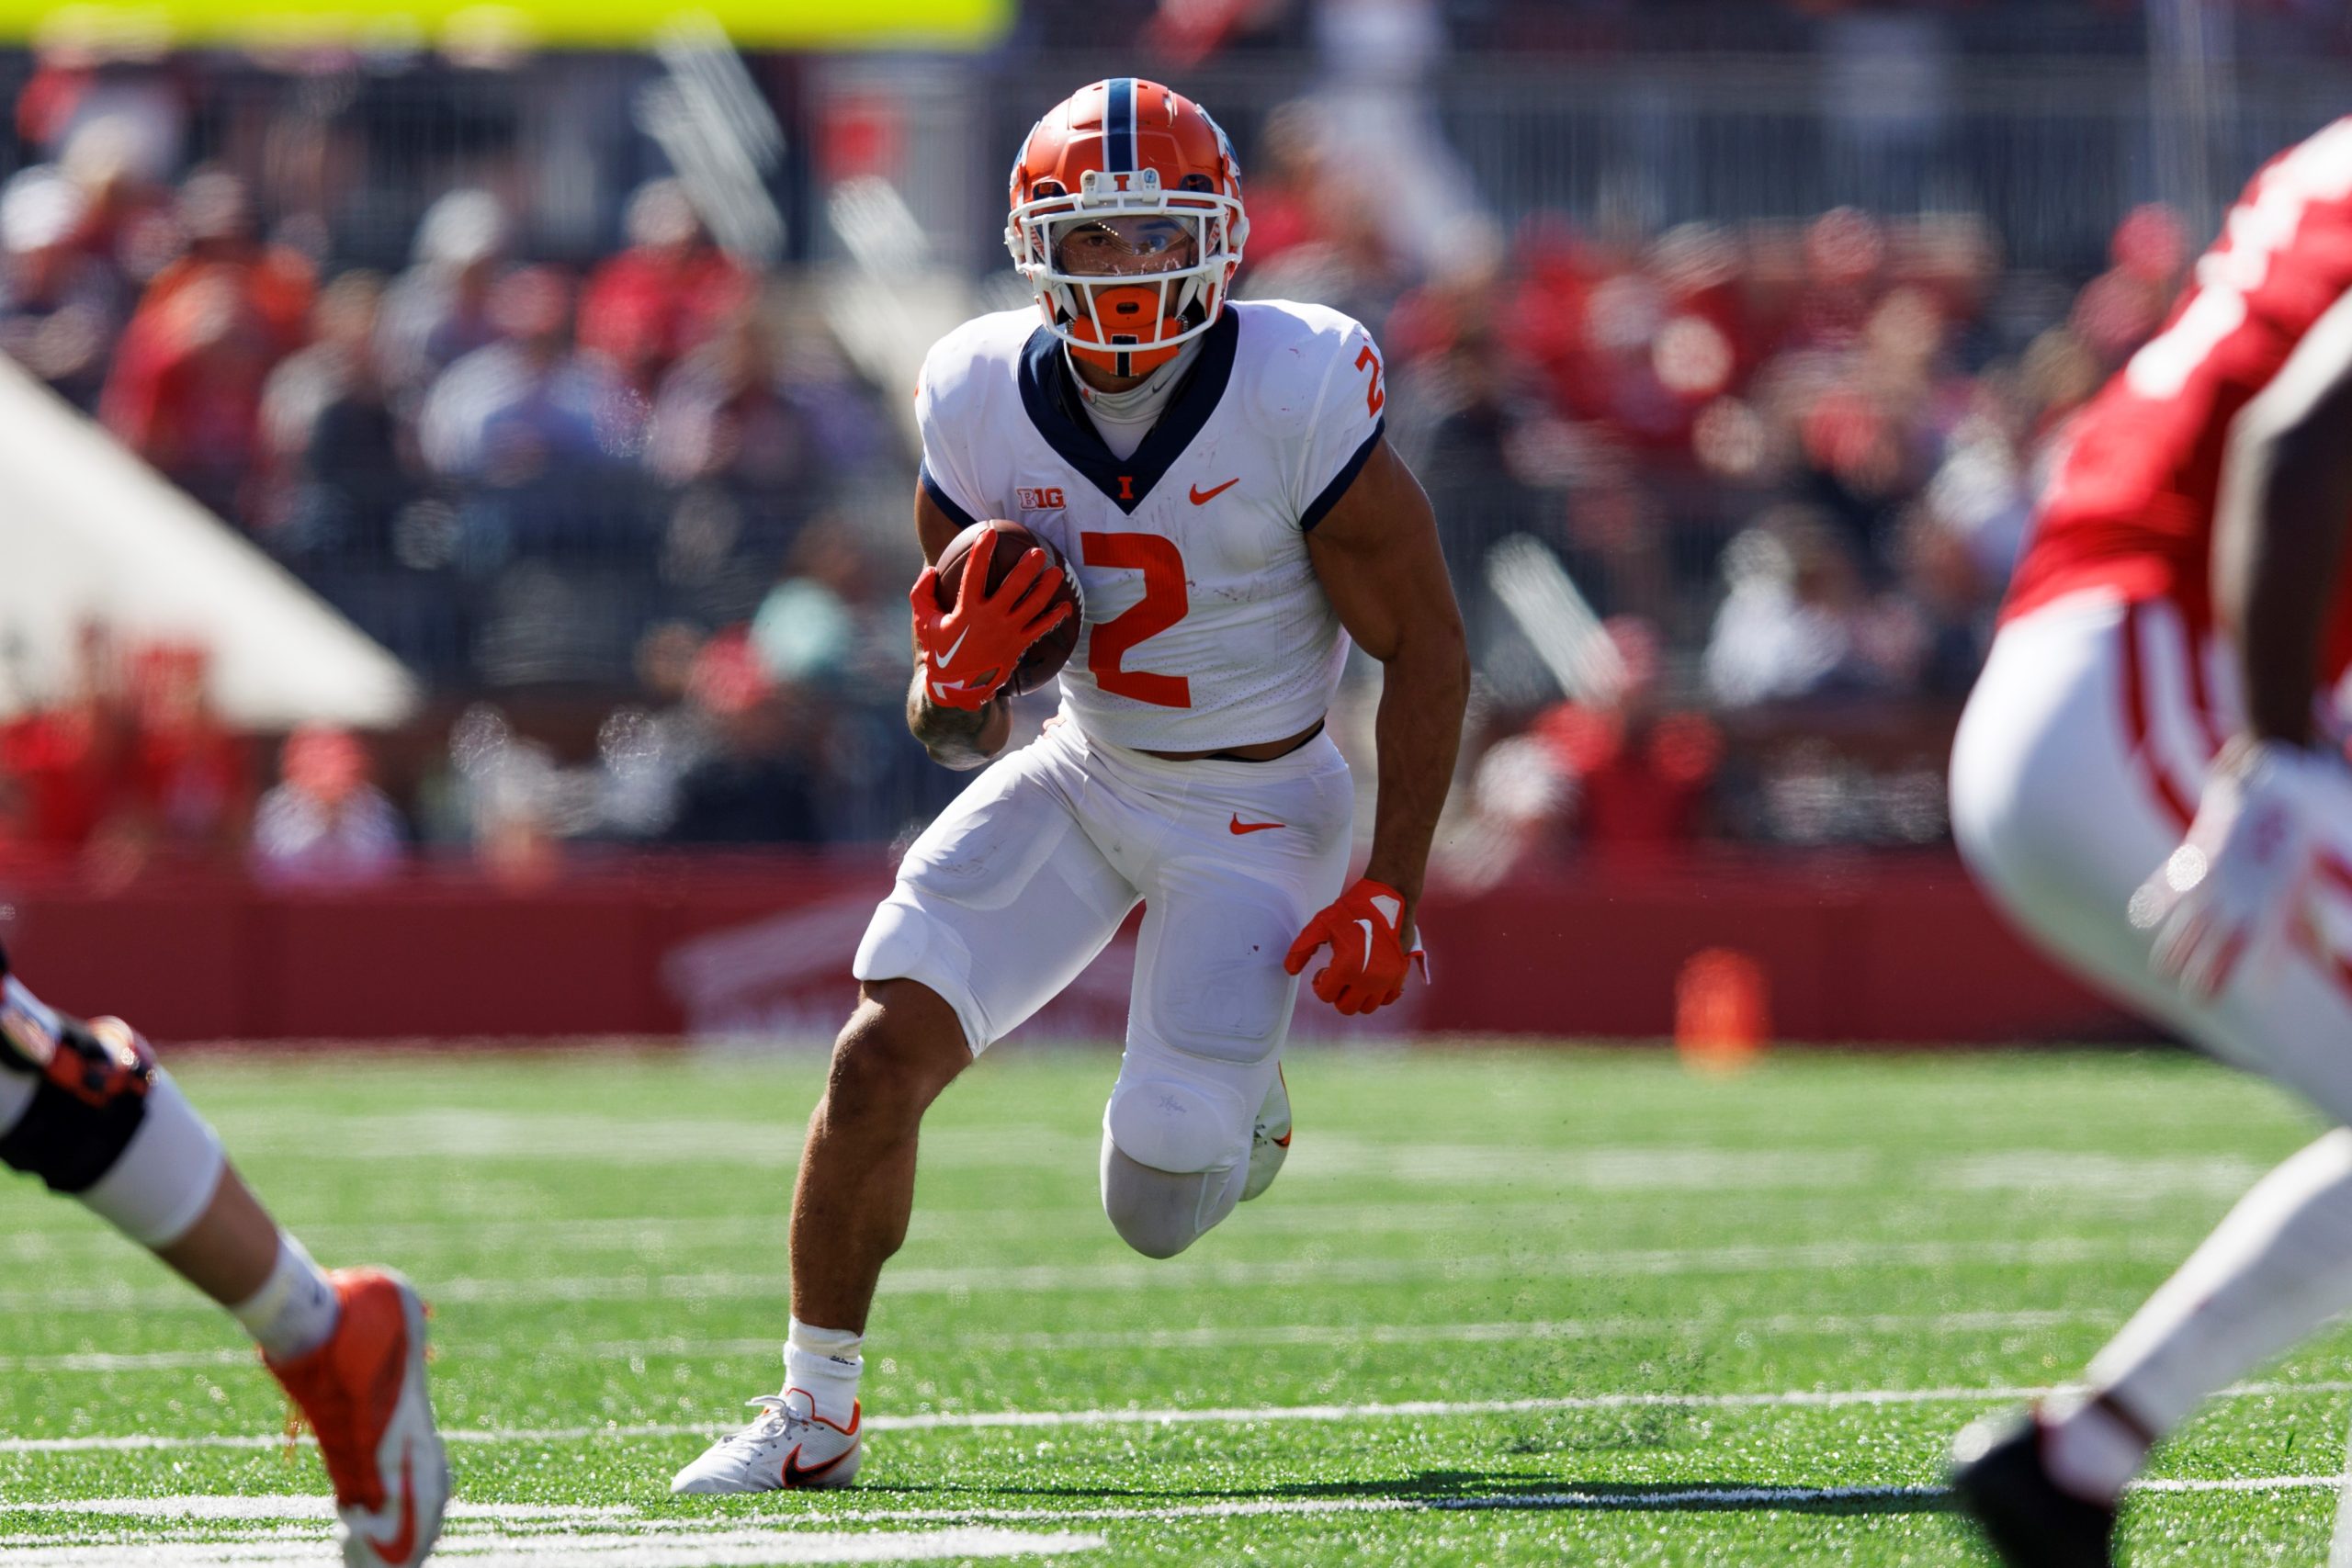 Still Chasing Brown: Illini Tailback Likely Maintains Status As Nation’s Leading Rusher